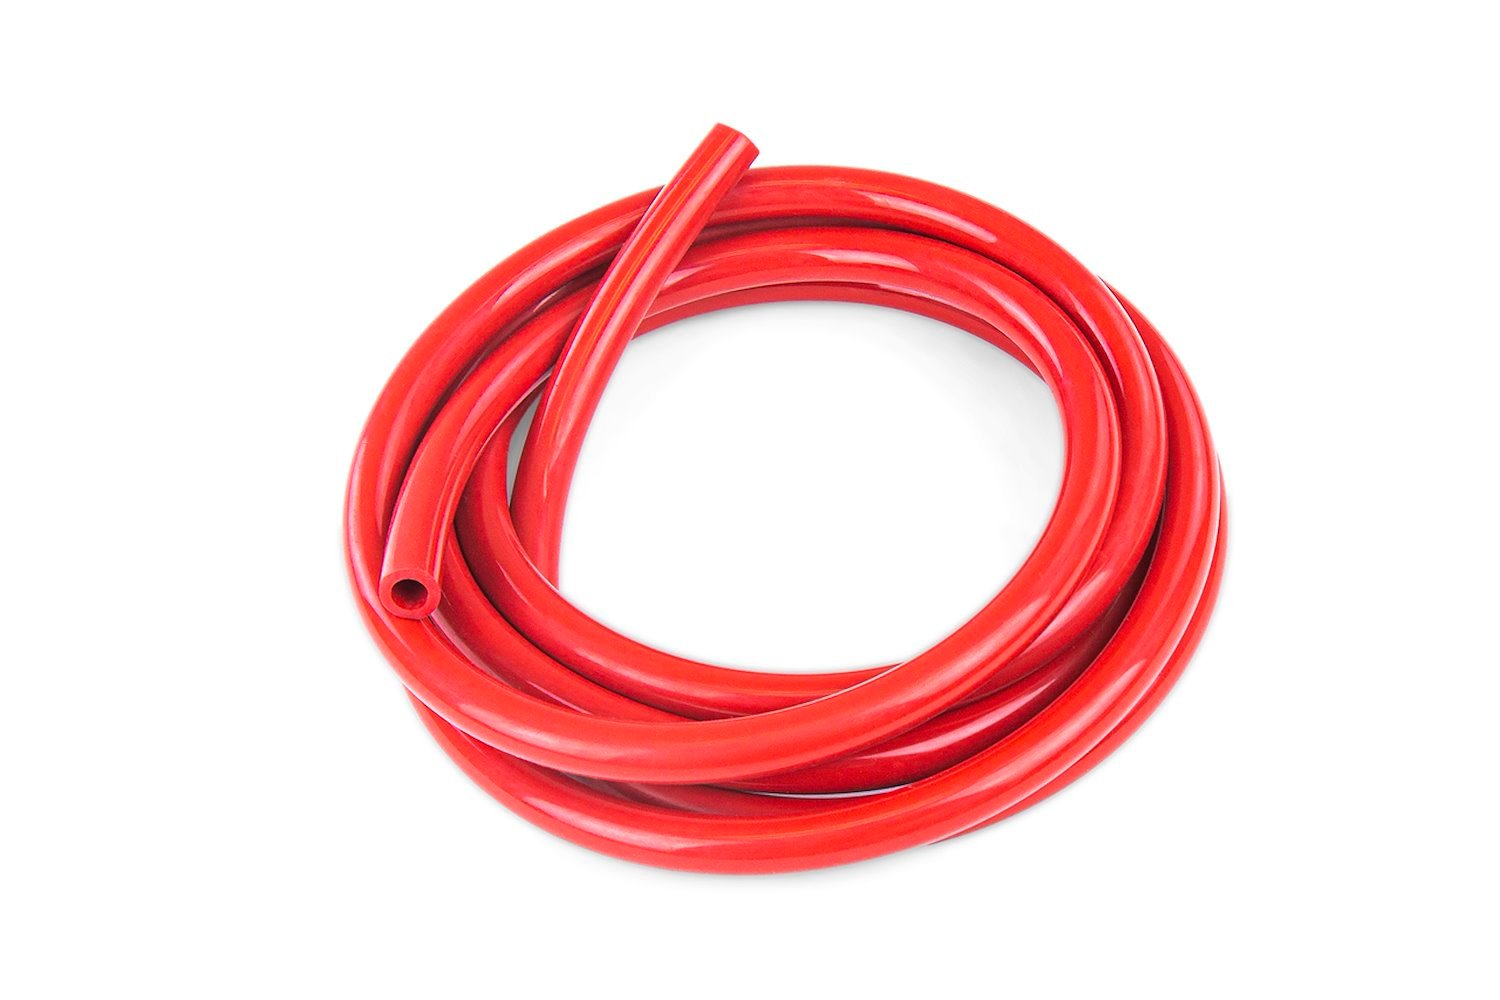 HTSVH35-REDx5 High-Temperature Silicone Vacuum Hose Tubing, 3.5 mm ID, 5 ft. Roll, Red